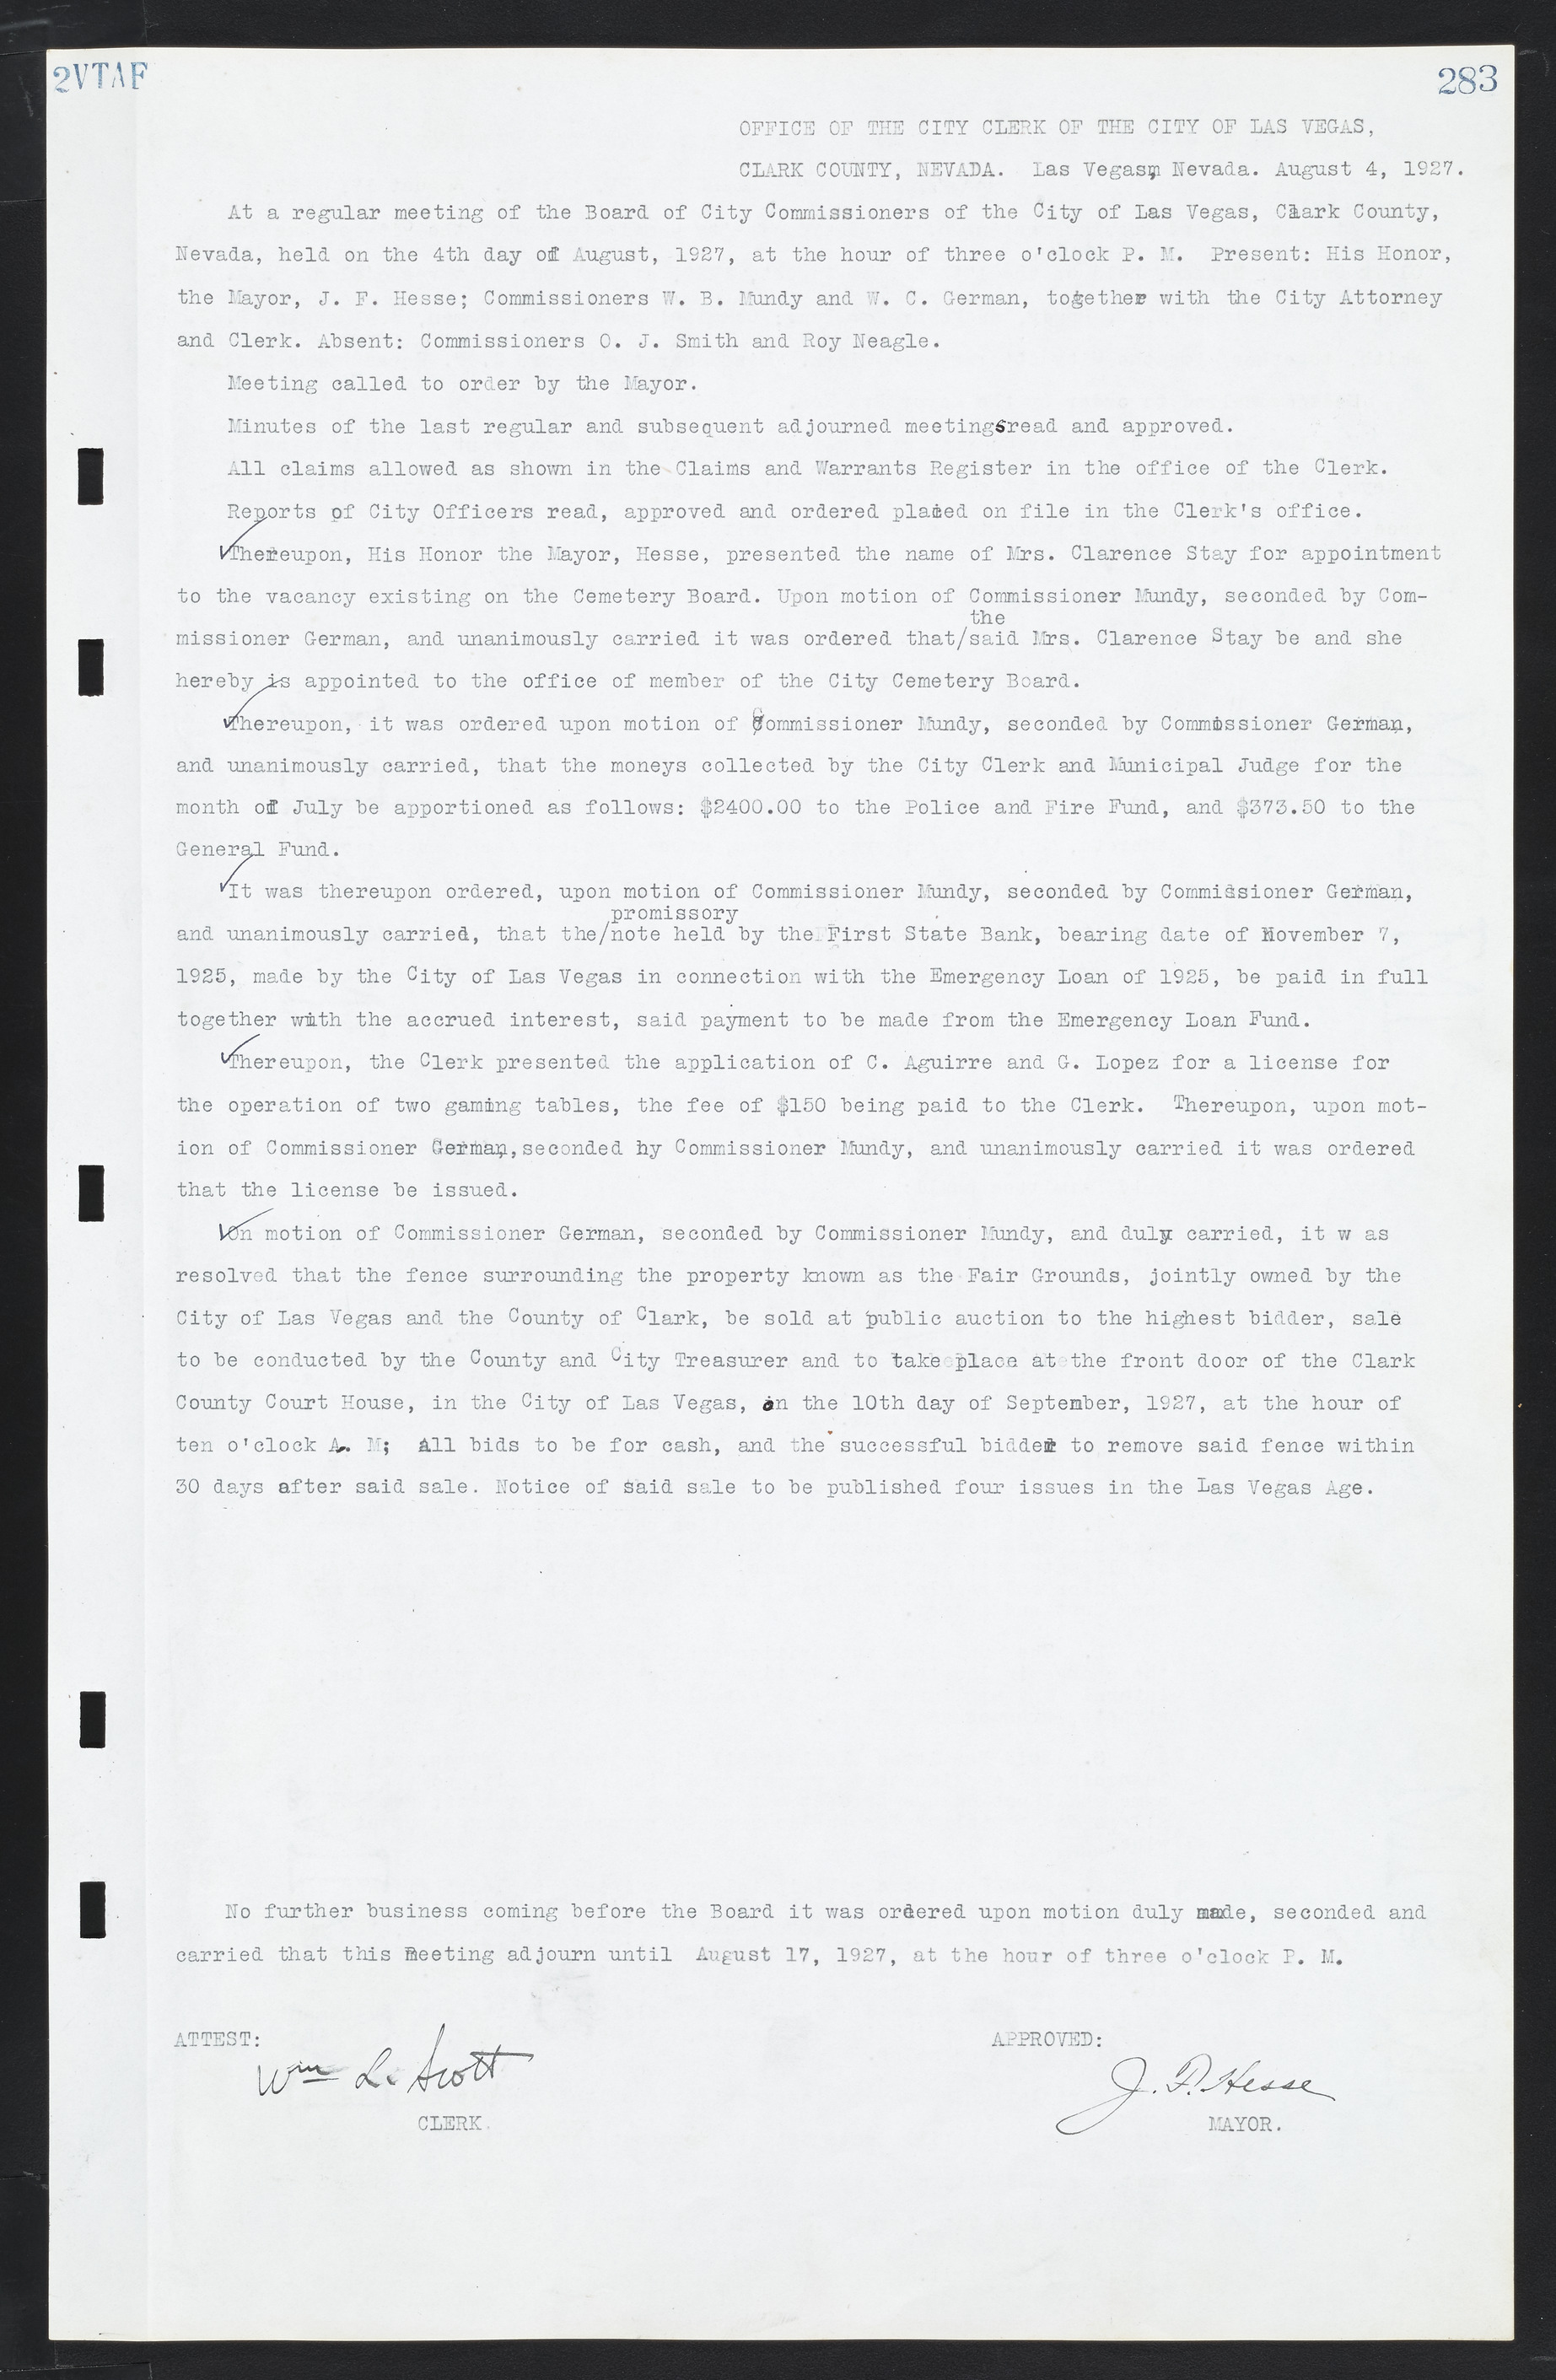 Las Vegas City Commission Minutes, March 1, 1922 to May 10, 1929, lvc000002-292